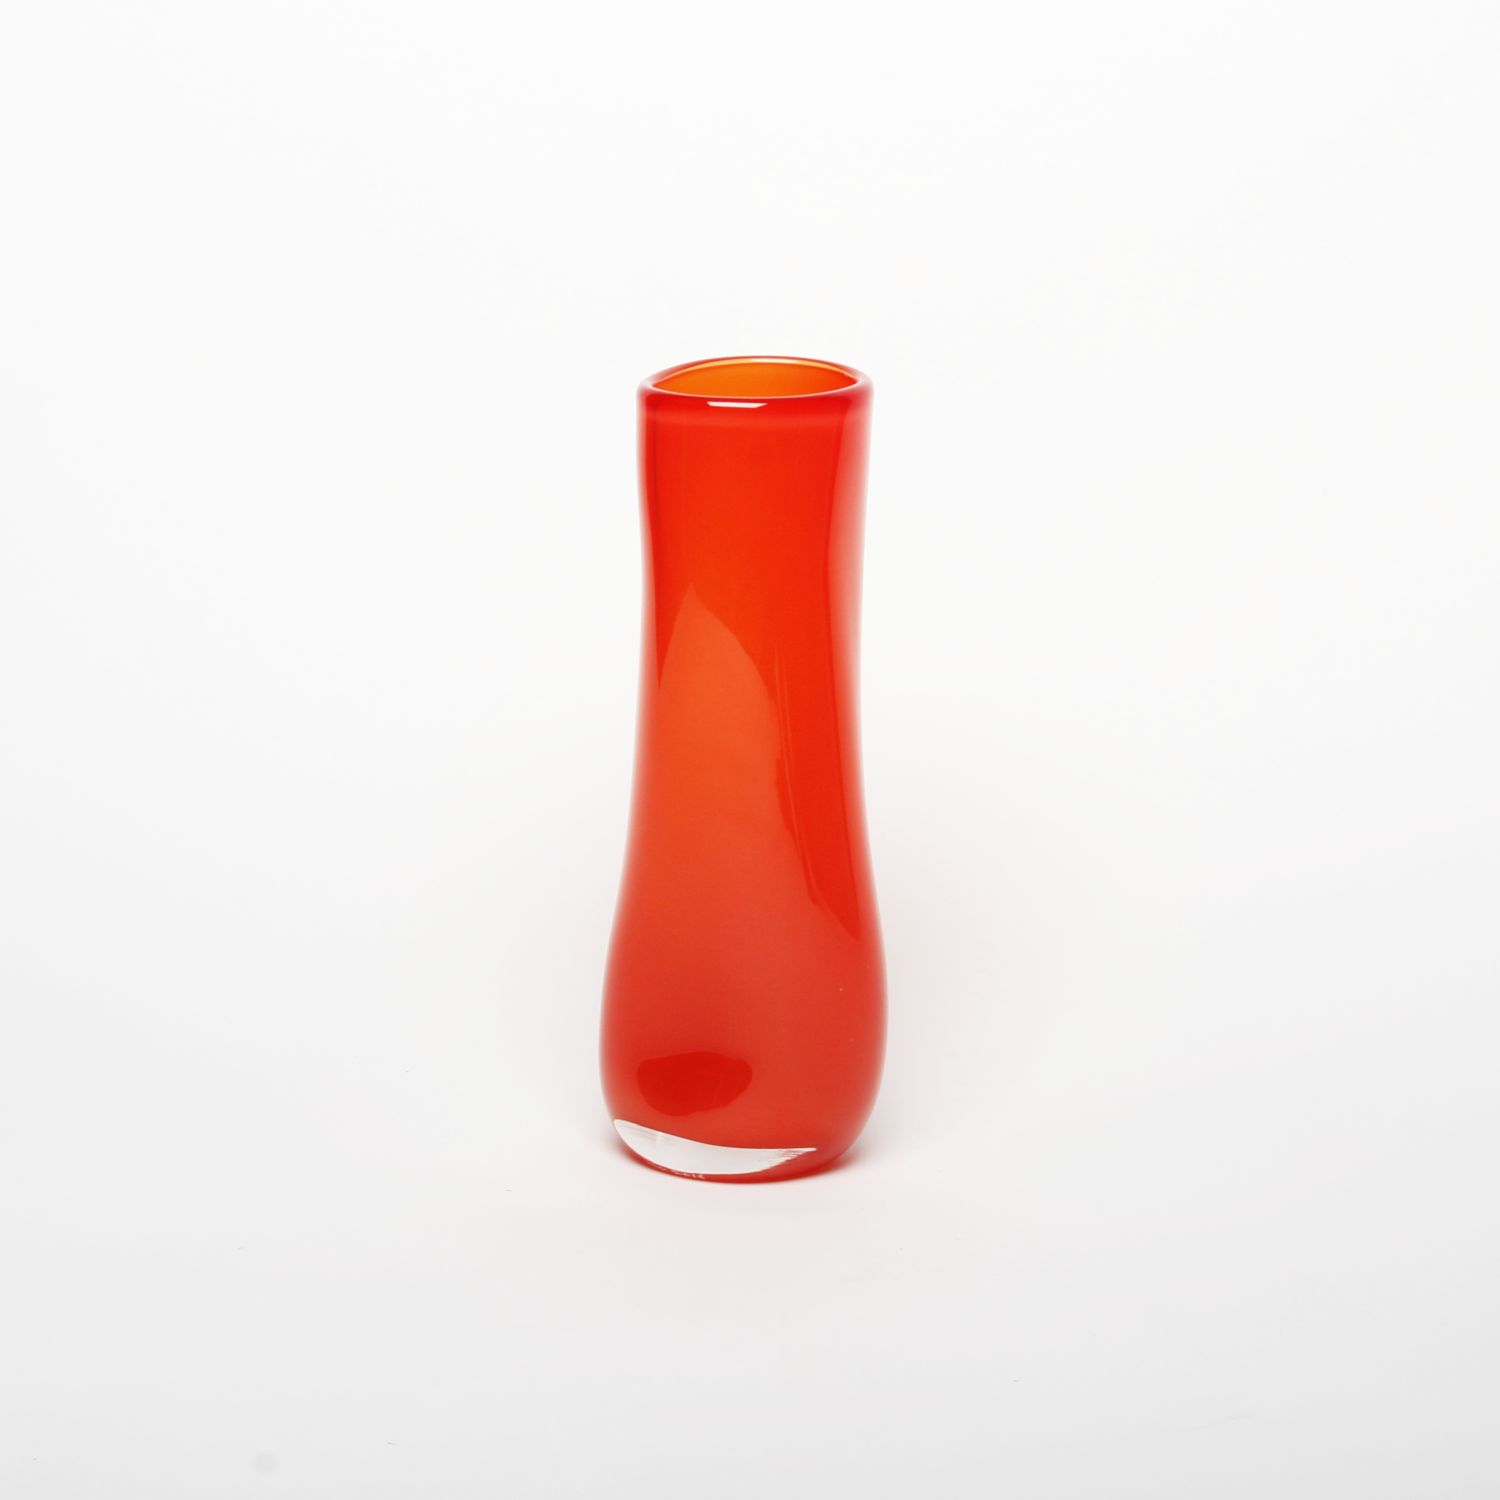 Jill Allan: Large Fat Lipped Vase (Assorted colours) Product Image 4 of 7